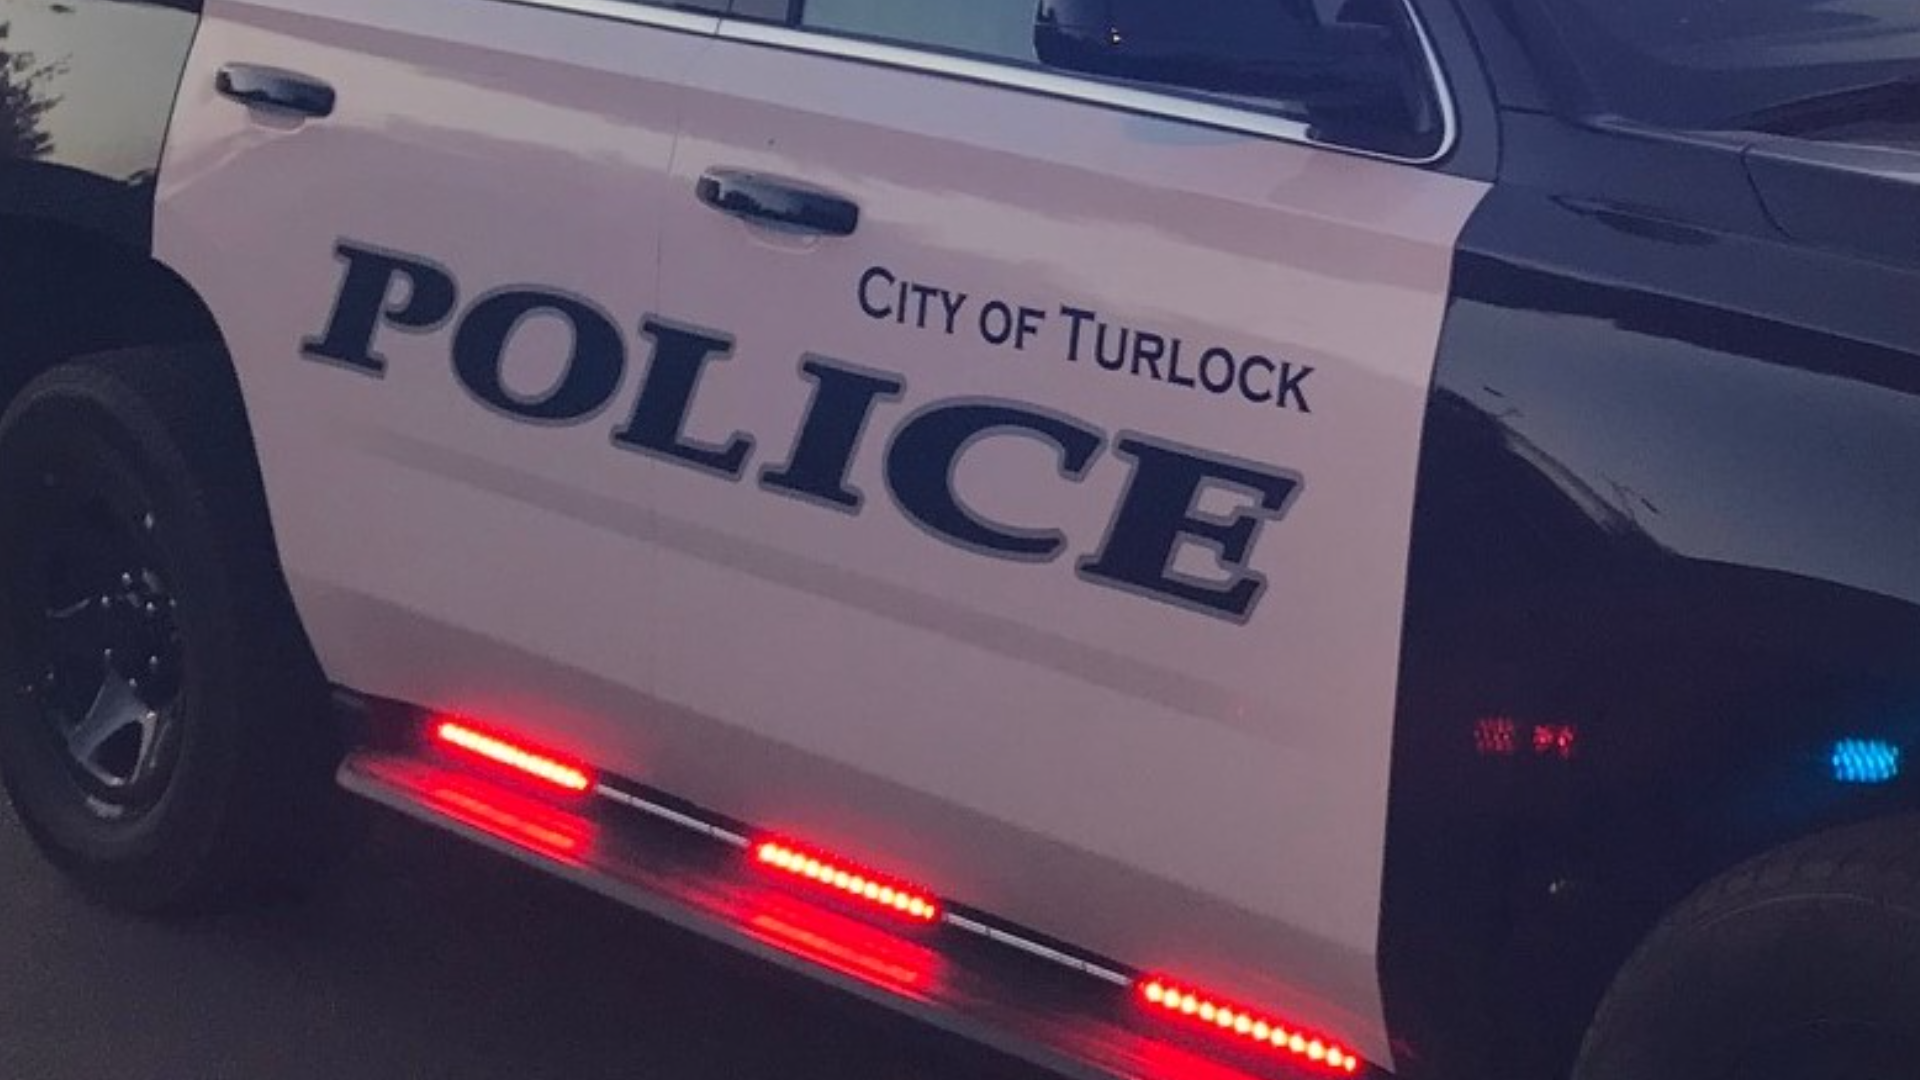 Turlock Police said the driver of the Wednesday morning hit-and-run was described as a male who was wearing an orange and yellow vest and driving a small blue car.